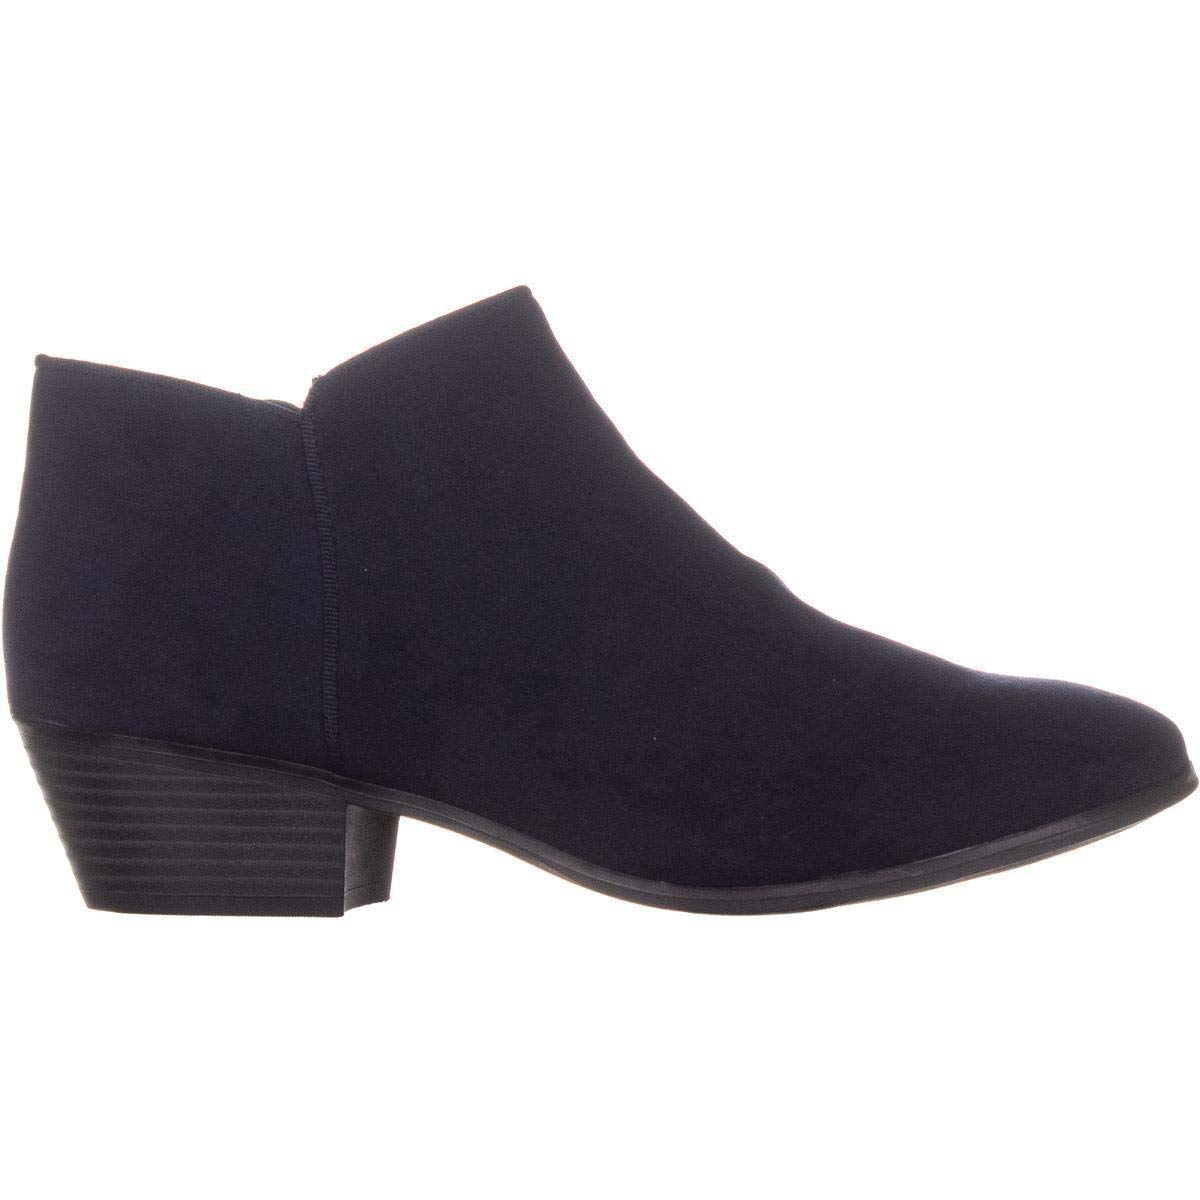 Style & Co. Womens Wileyy Padded Insole Booties - image 4 of 5